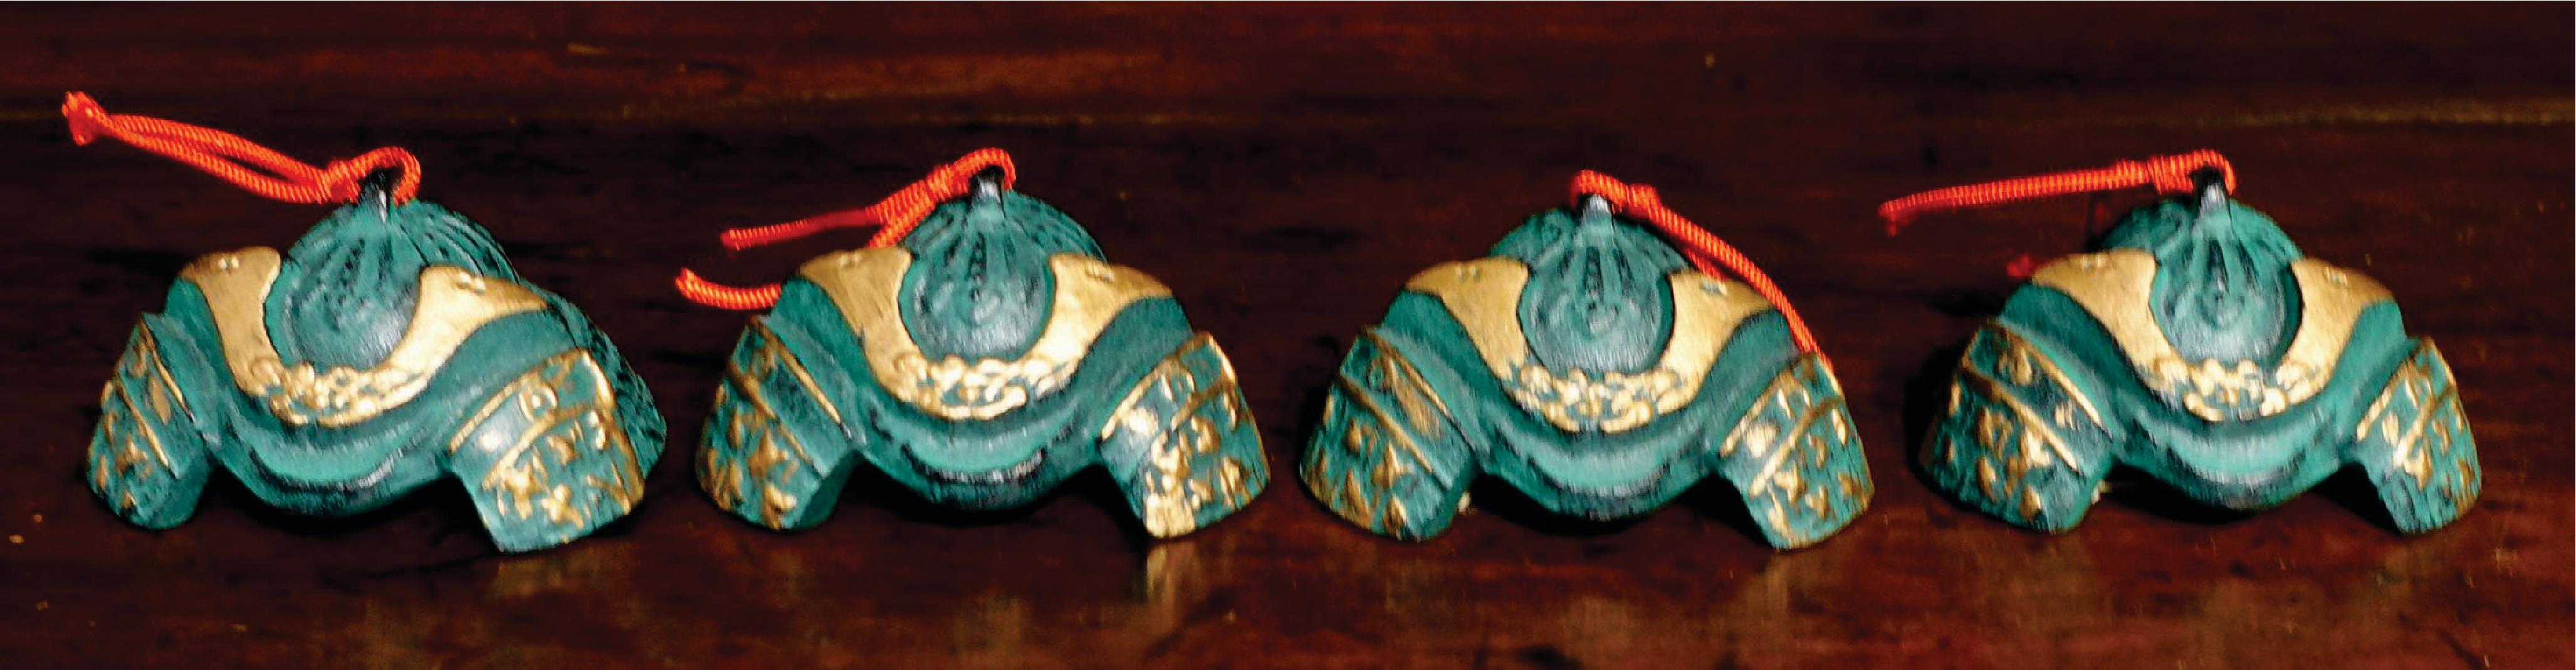 4 painted-gilt iron paper weights by Boku Undo Co. Japan NO. 20
This is an old stocked item and still in its new condition in the boxes.